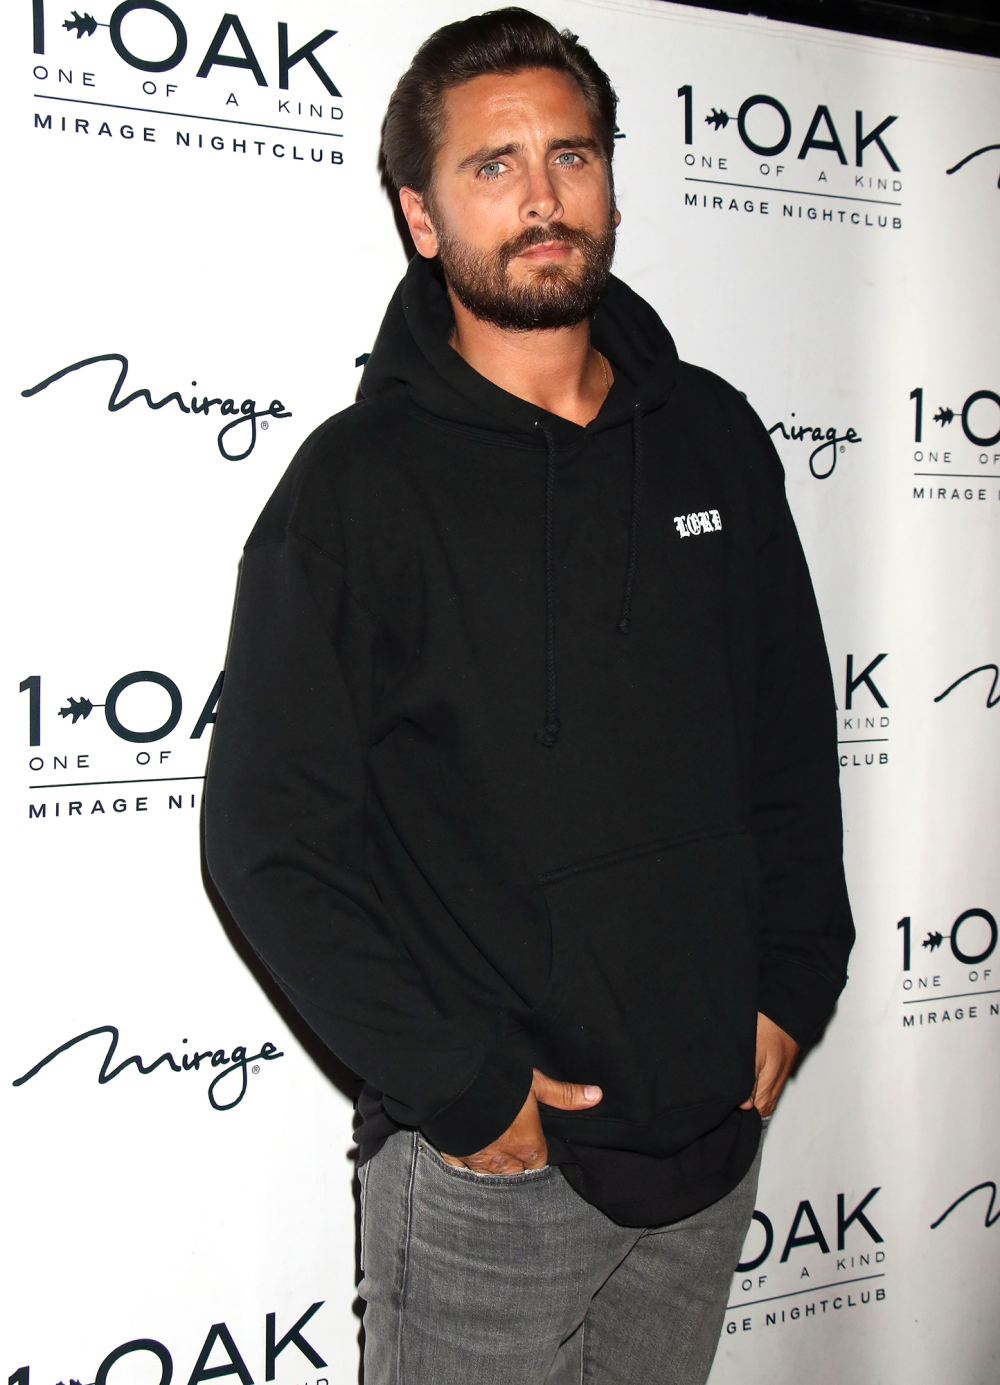 Scott Disick’s Relationship With Kardashians ‘Strained’ Since Show Wrapped: ‘His Biggest Fear’